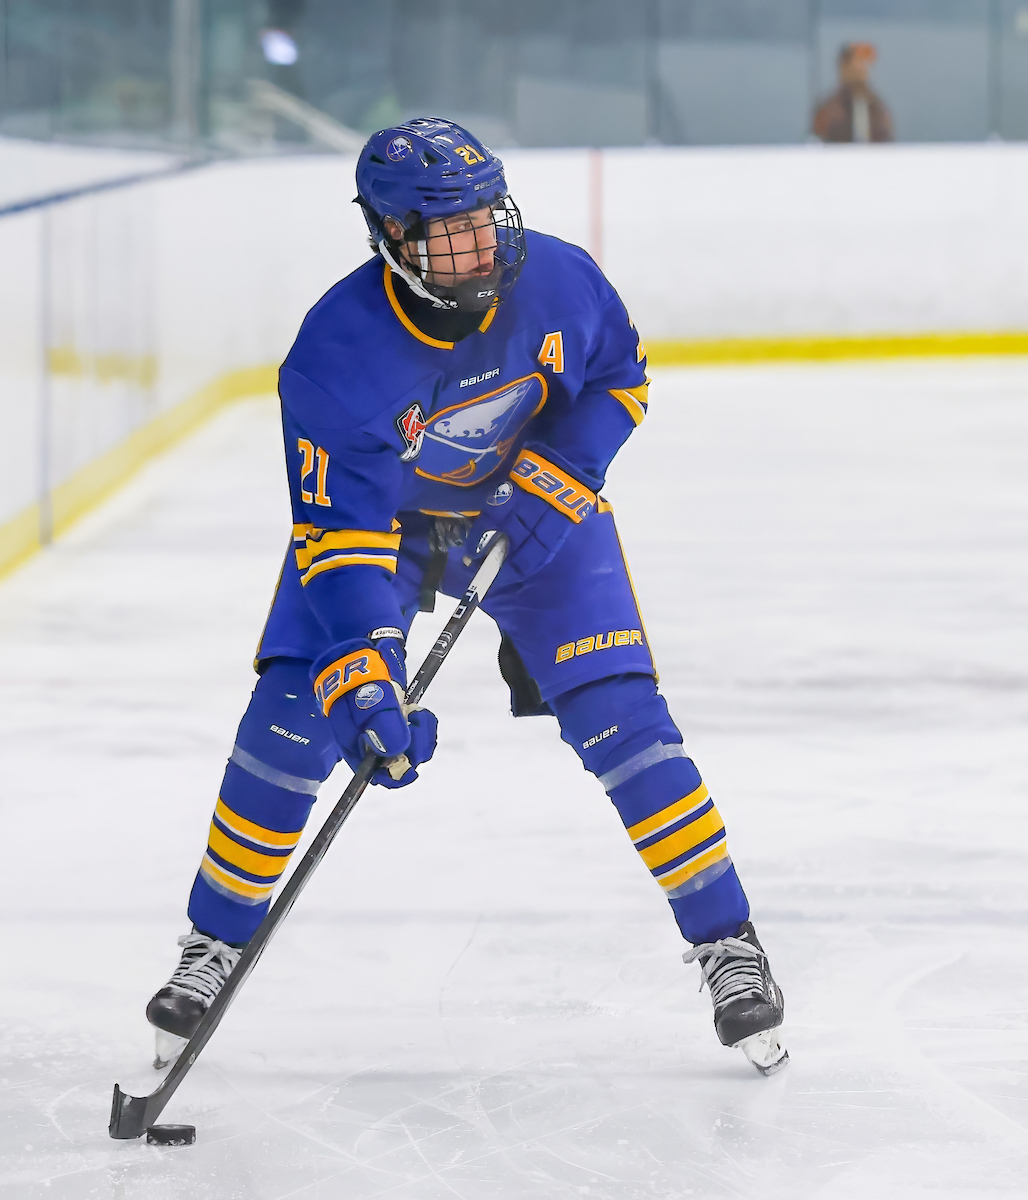 FEATURE: Patrick Cole Commits to SUNY Plattsburgh